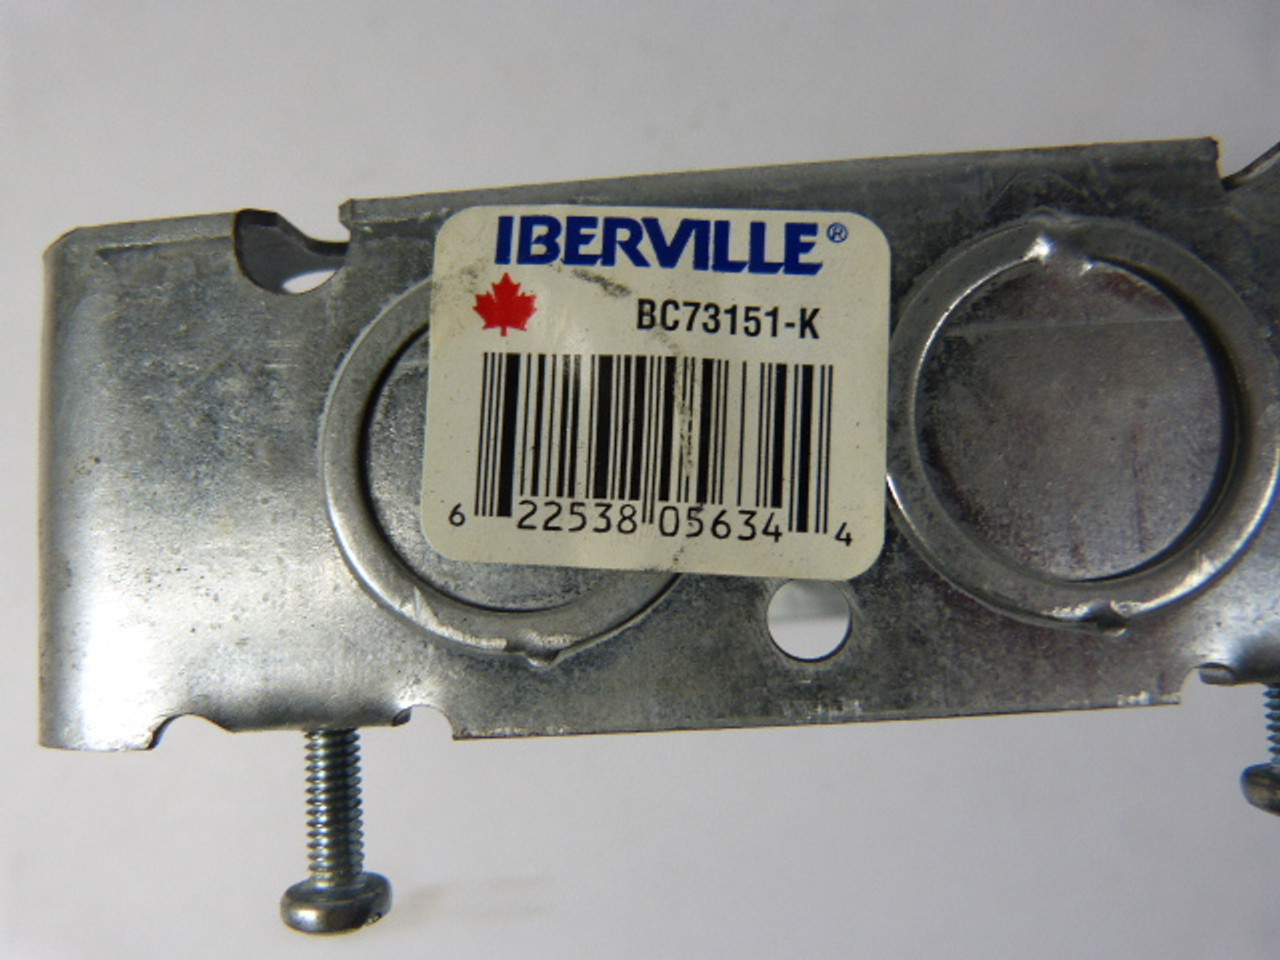 Iberville BC73151-K Switch Case Cover USED